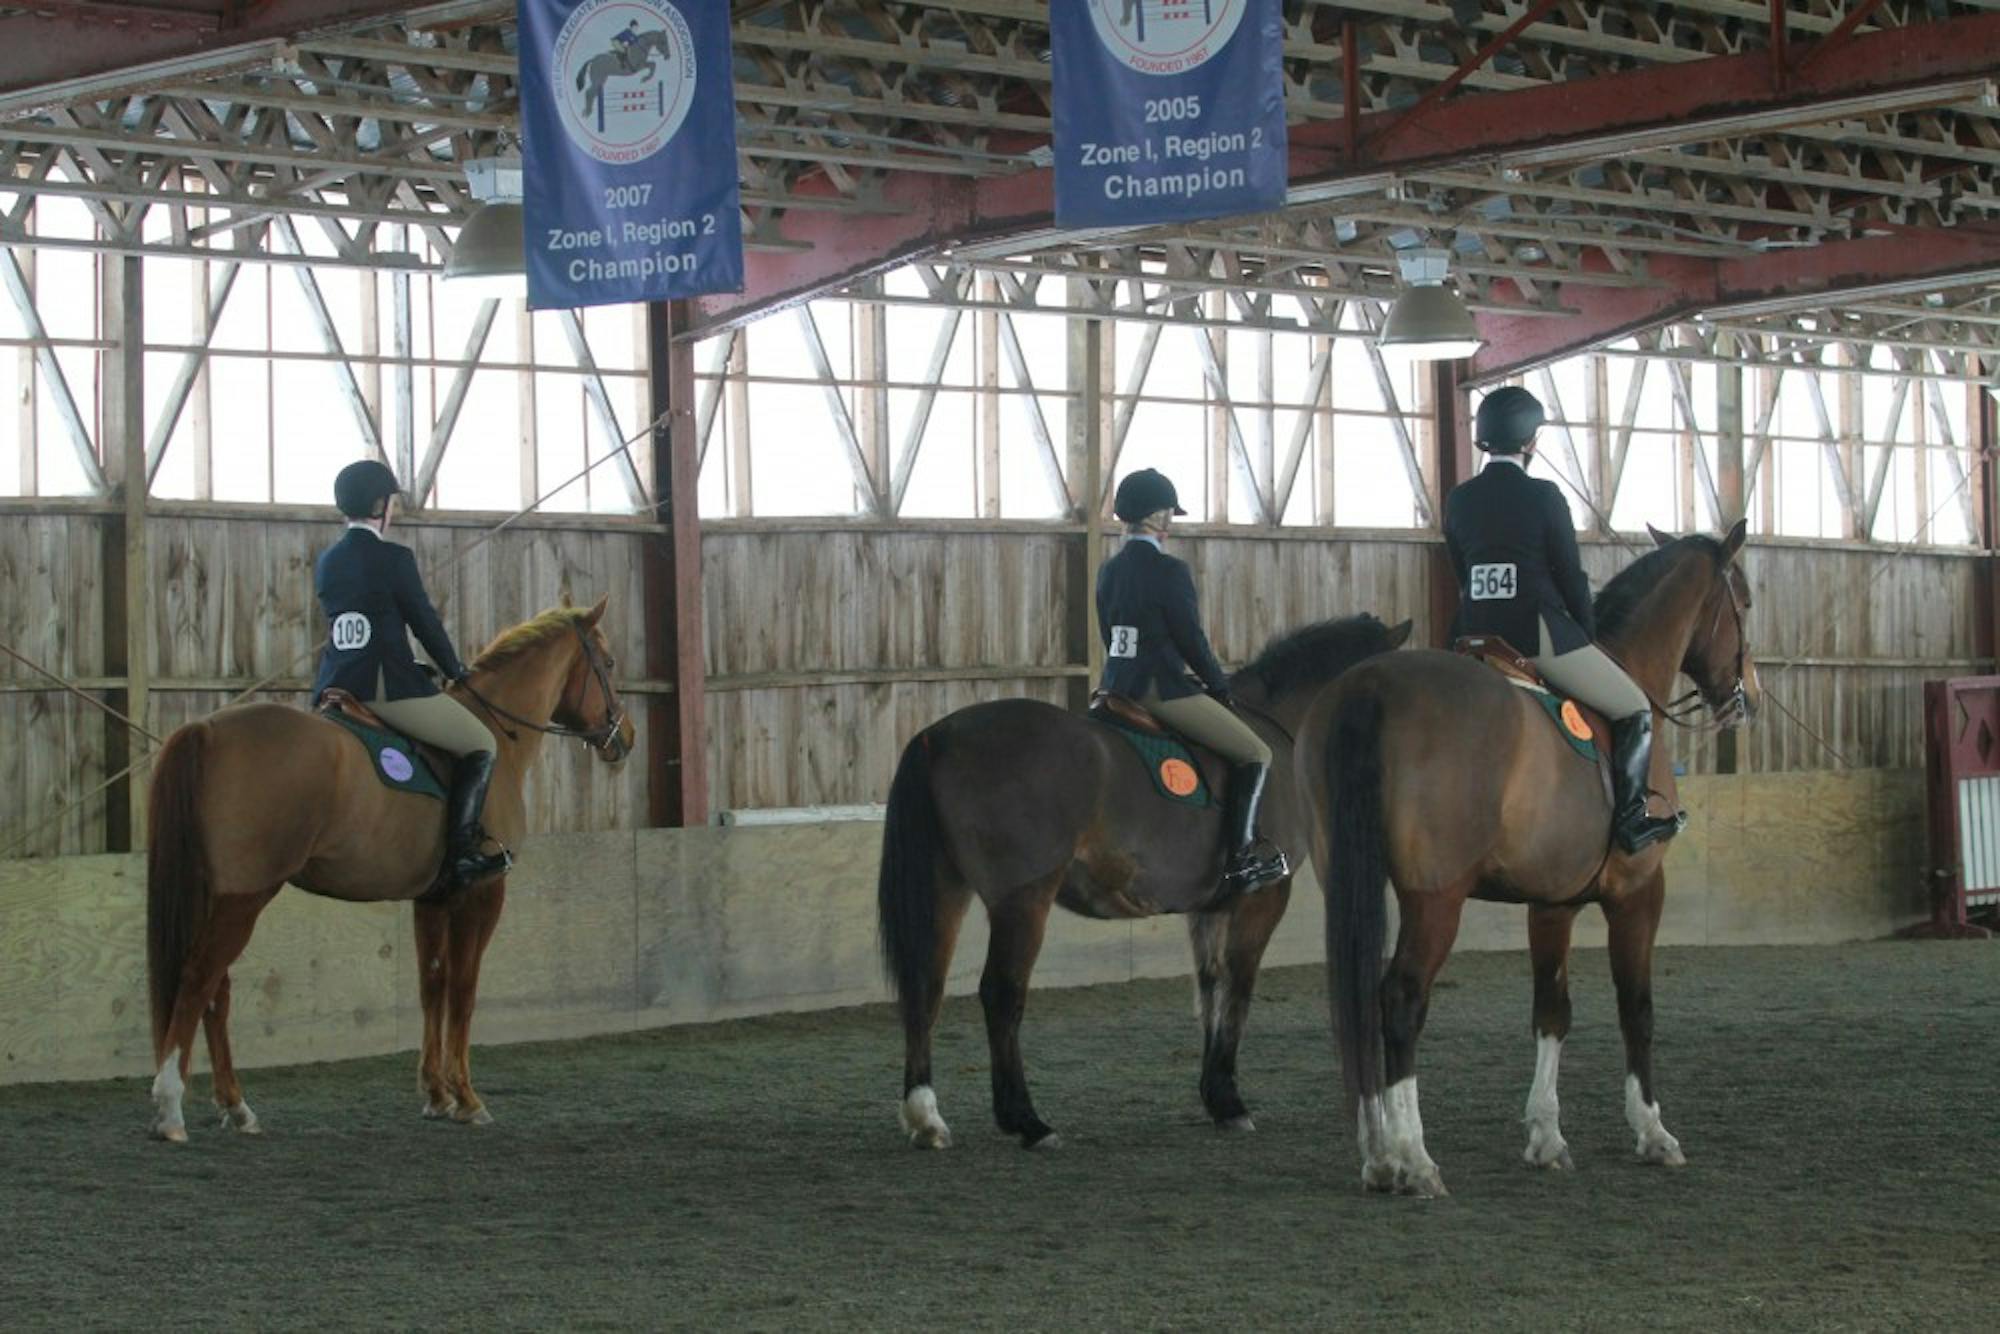 The Dartmouth Equestrian team officially became a women's varsity team in 2015 (photo from 2011).&nbsp;